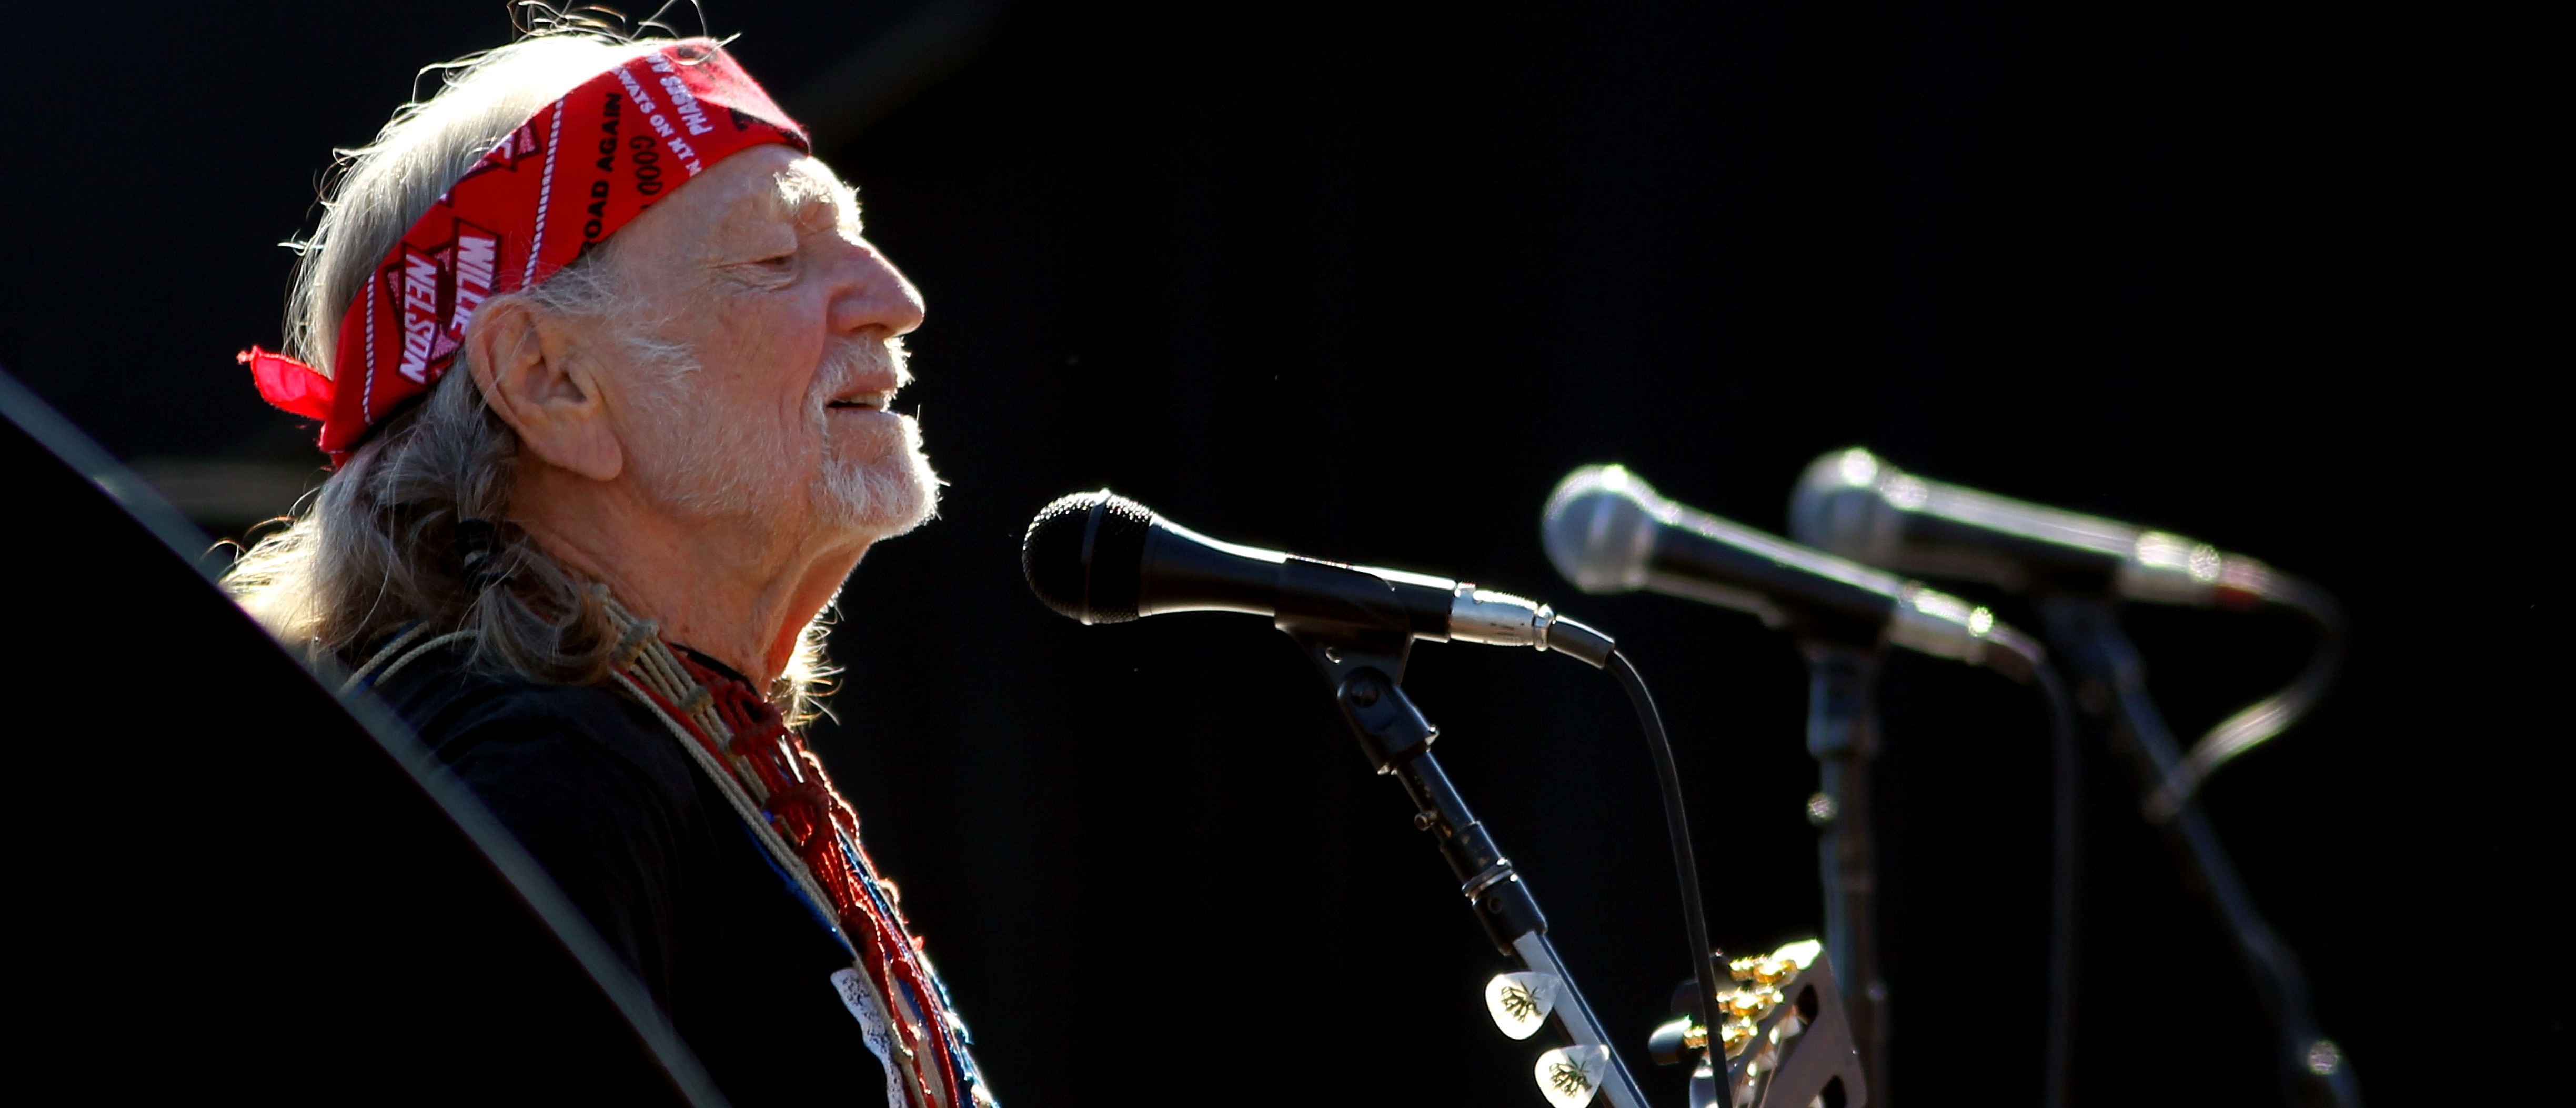 Best Willie Nelson Wallpapers and Photos  NSF  Magazine